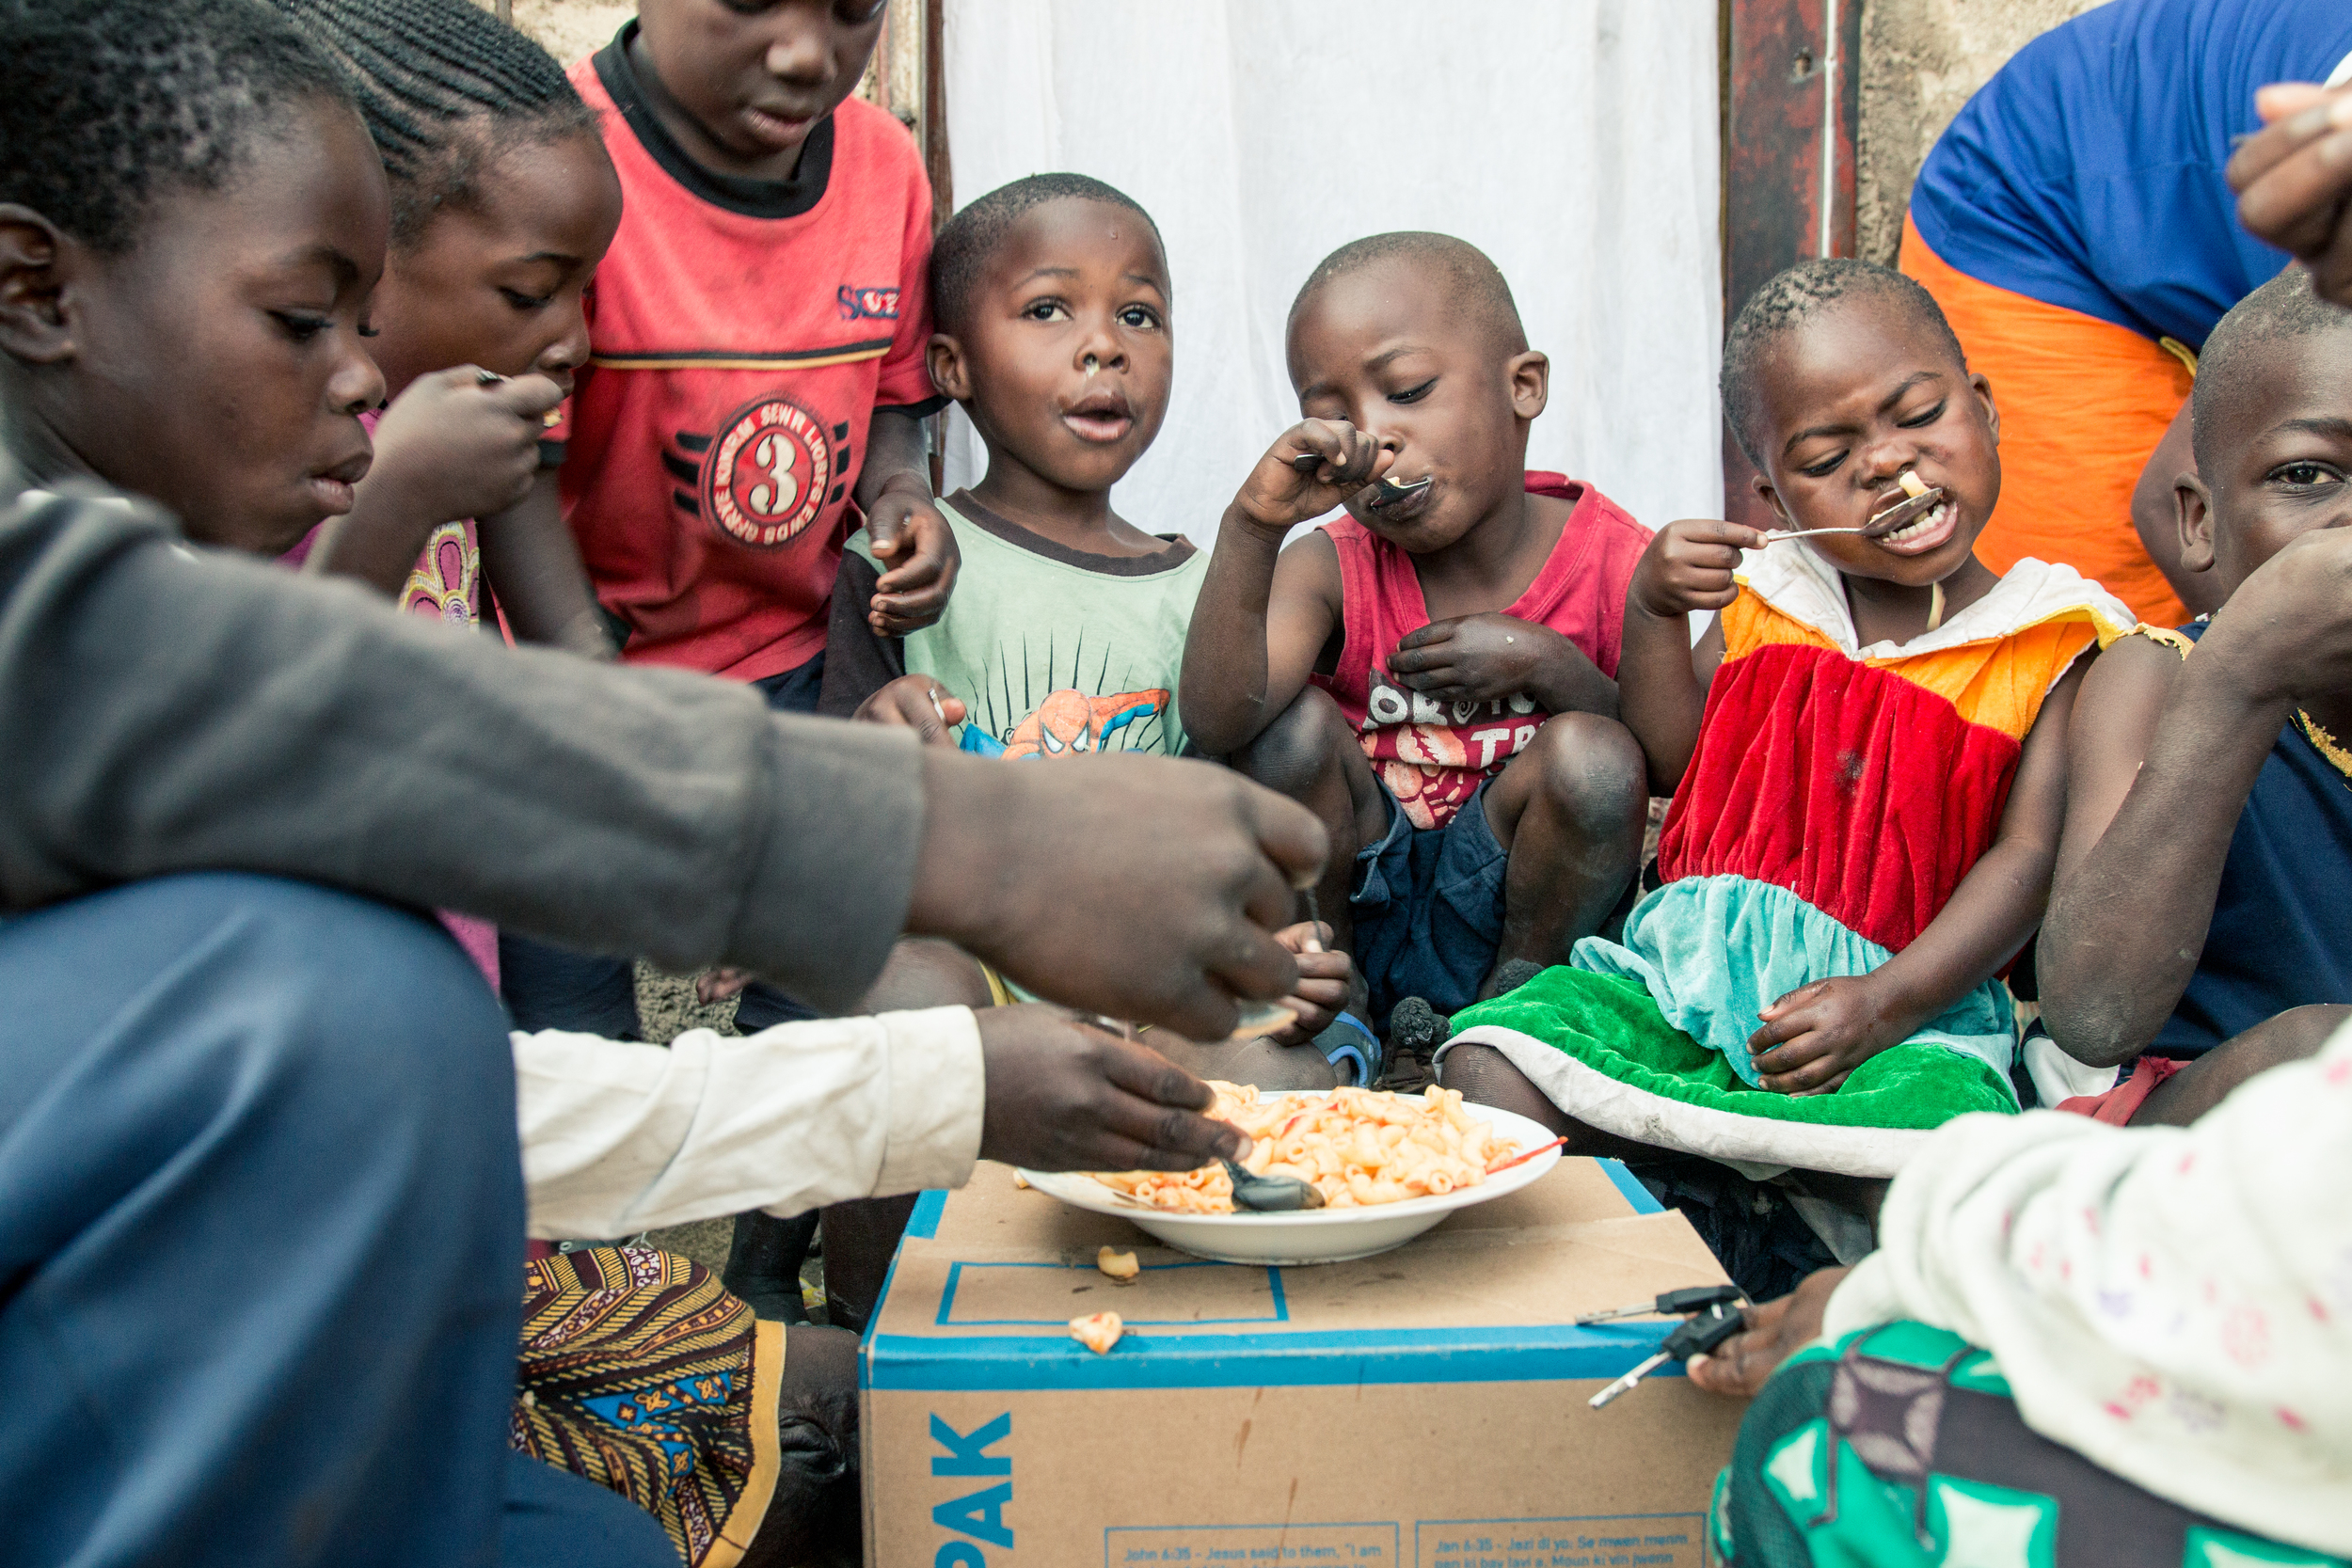  ZAMBIA: [Home Visit] I was reminded that generosity isn't contingent on wealth. People who have the least often give the most (Luke 21:1-4).&nbsp;Sarah prepared food and shared it with children from the community. We anticipated her feeding her fami